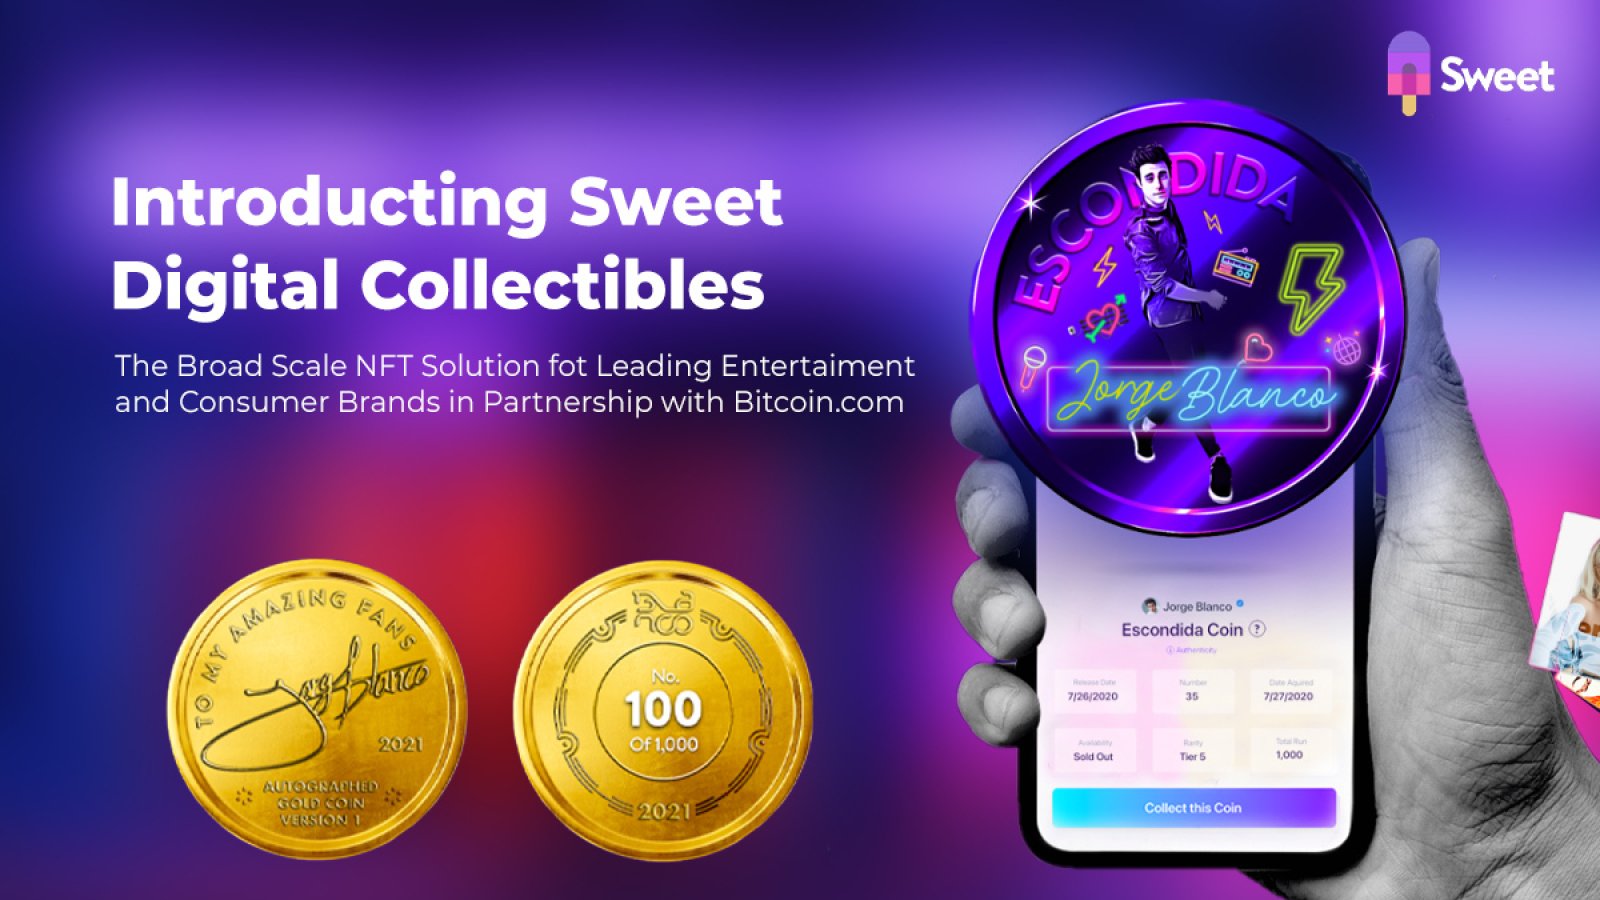 Sweet Launches Broad-Scale NFT Solution for Leading Entertainment and Consumer Brands in Partnership with Bitcoin.com 